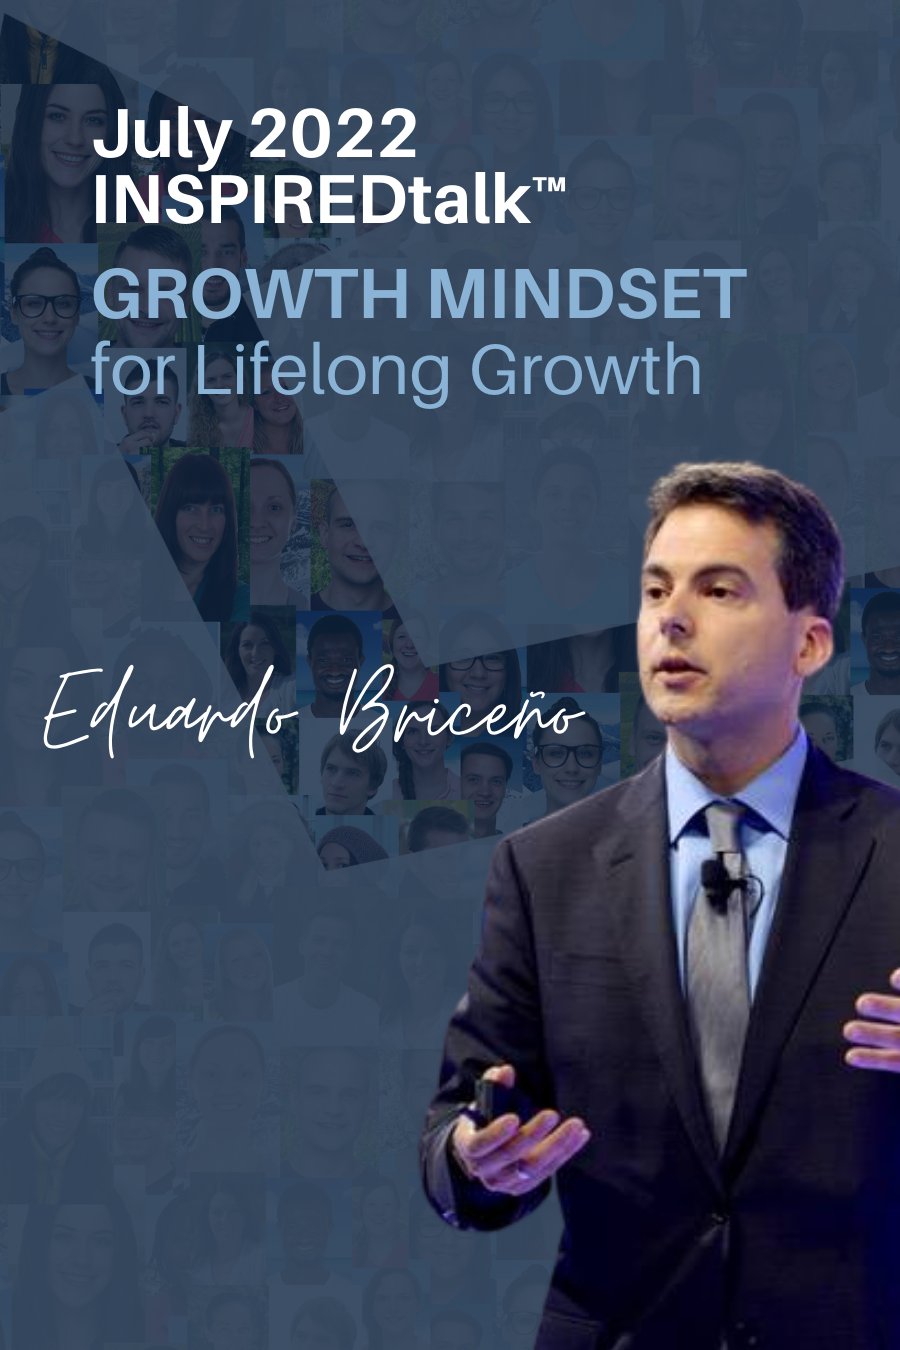 INSPIREDtalk™ GROWTH MINDSET: What, Why, and How? With Eduardo Briceño